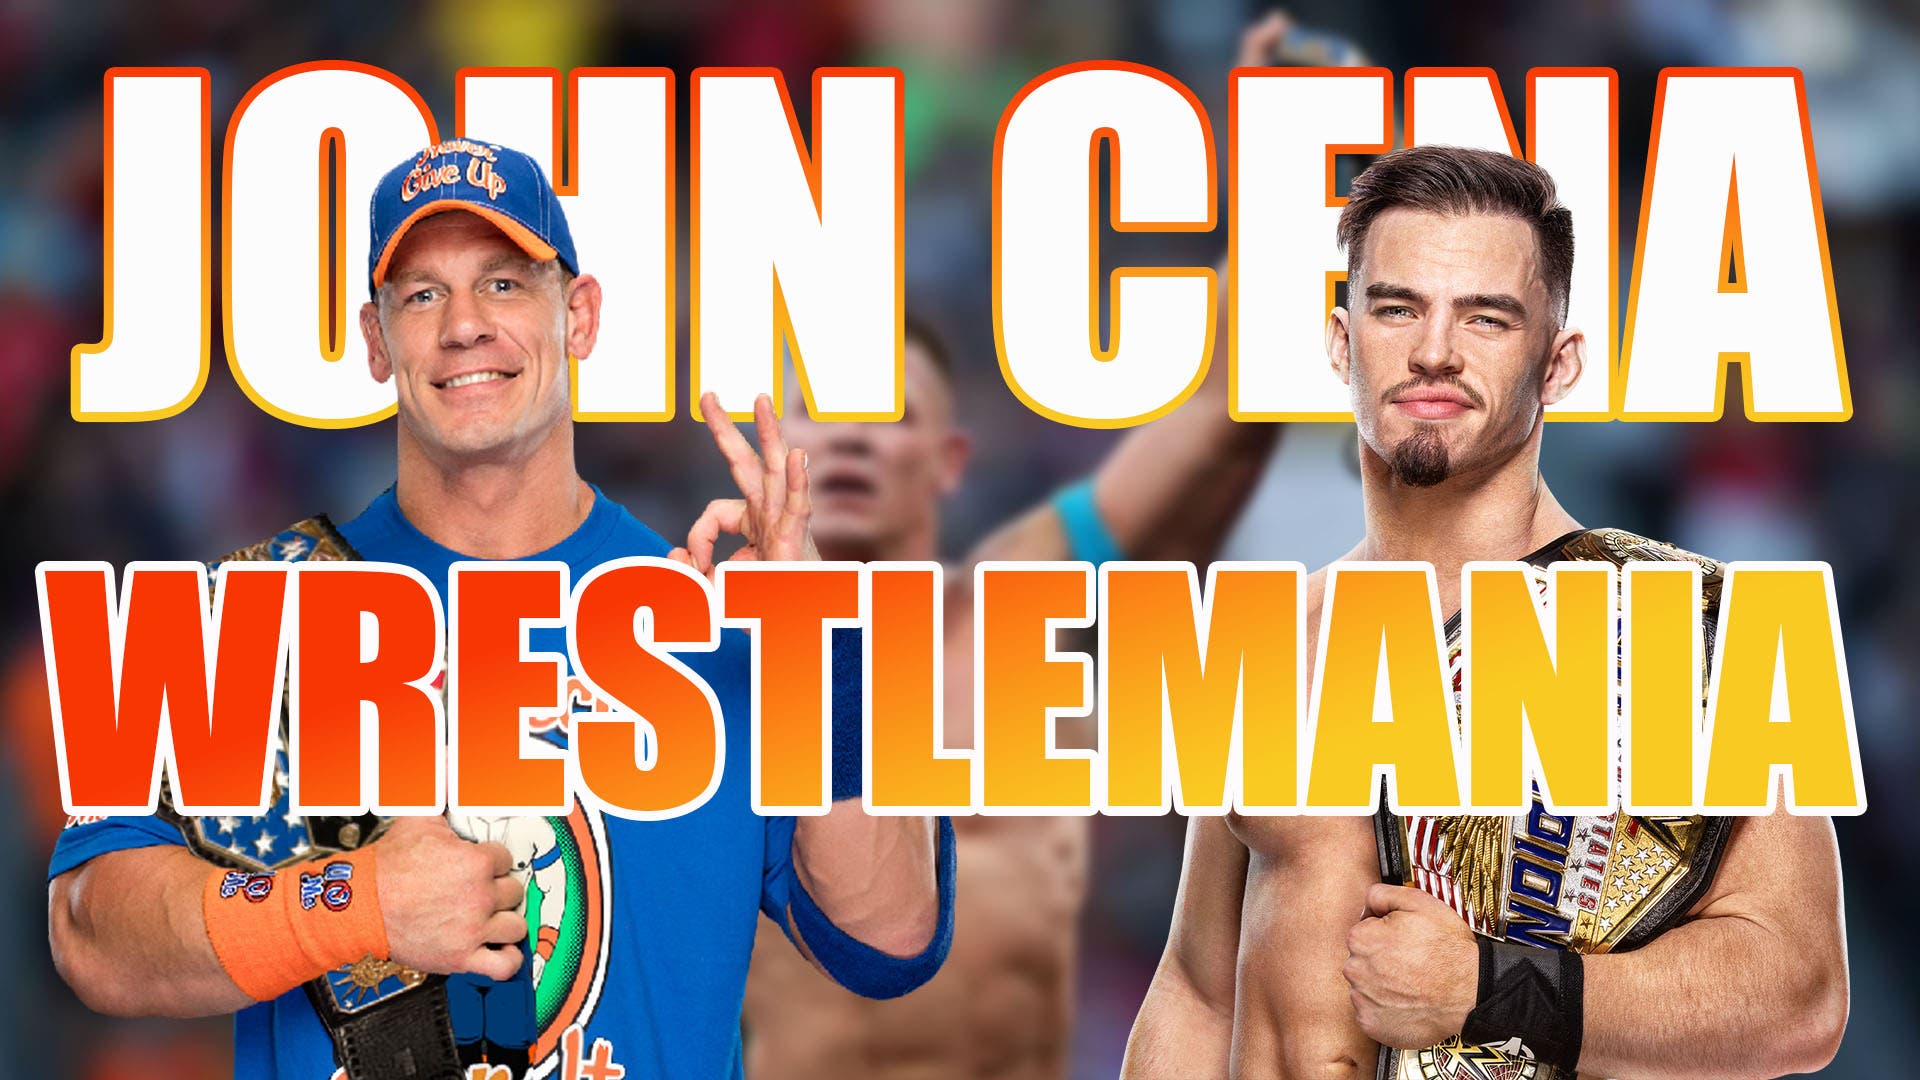 WWE: It was the return of John Cena confirming his fight at Wrestlemania